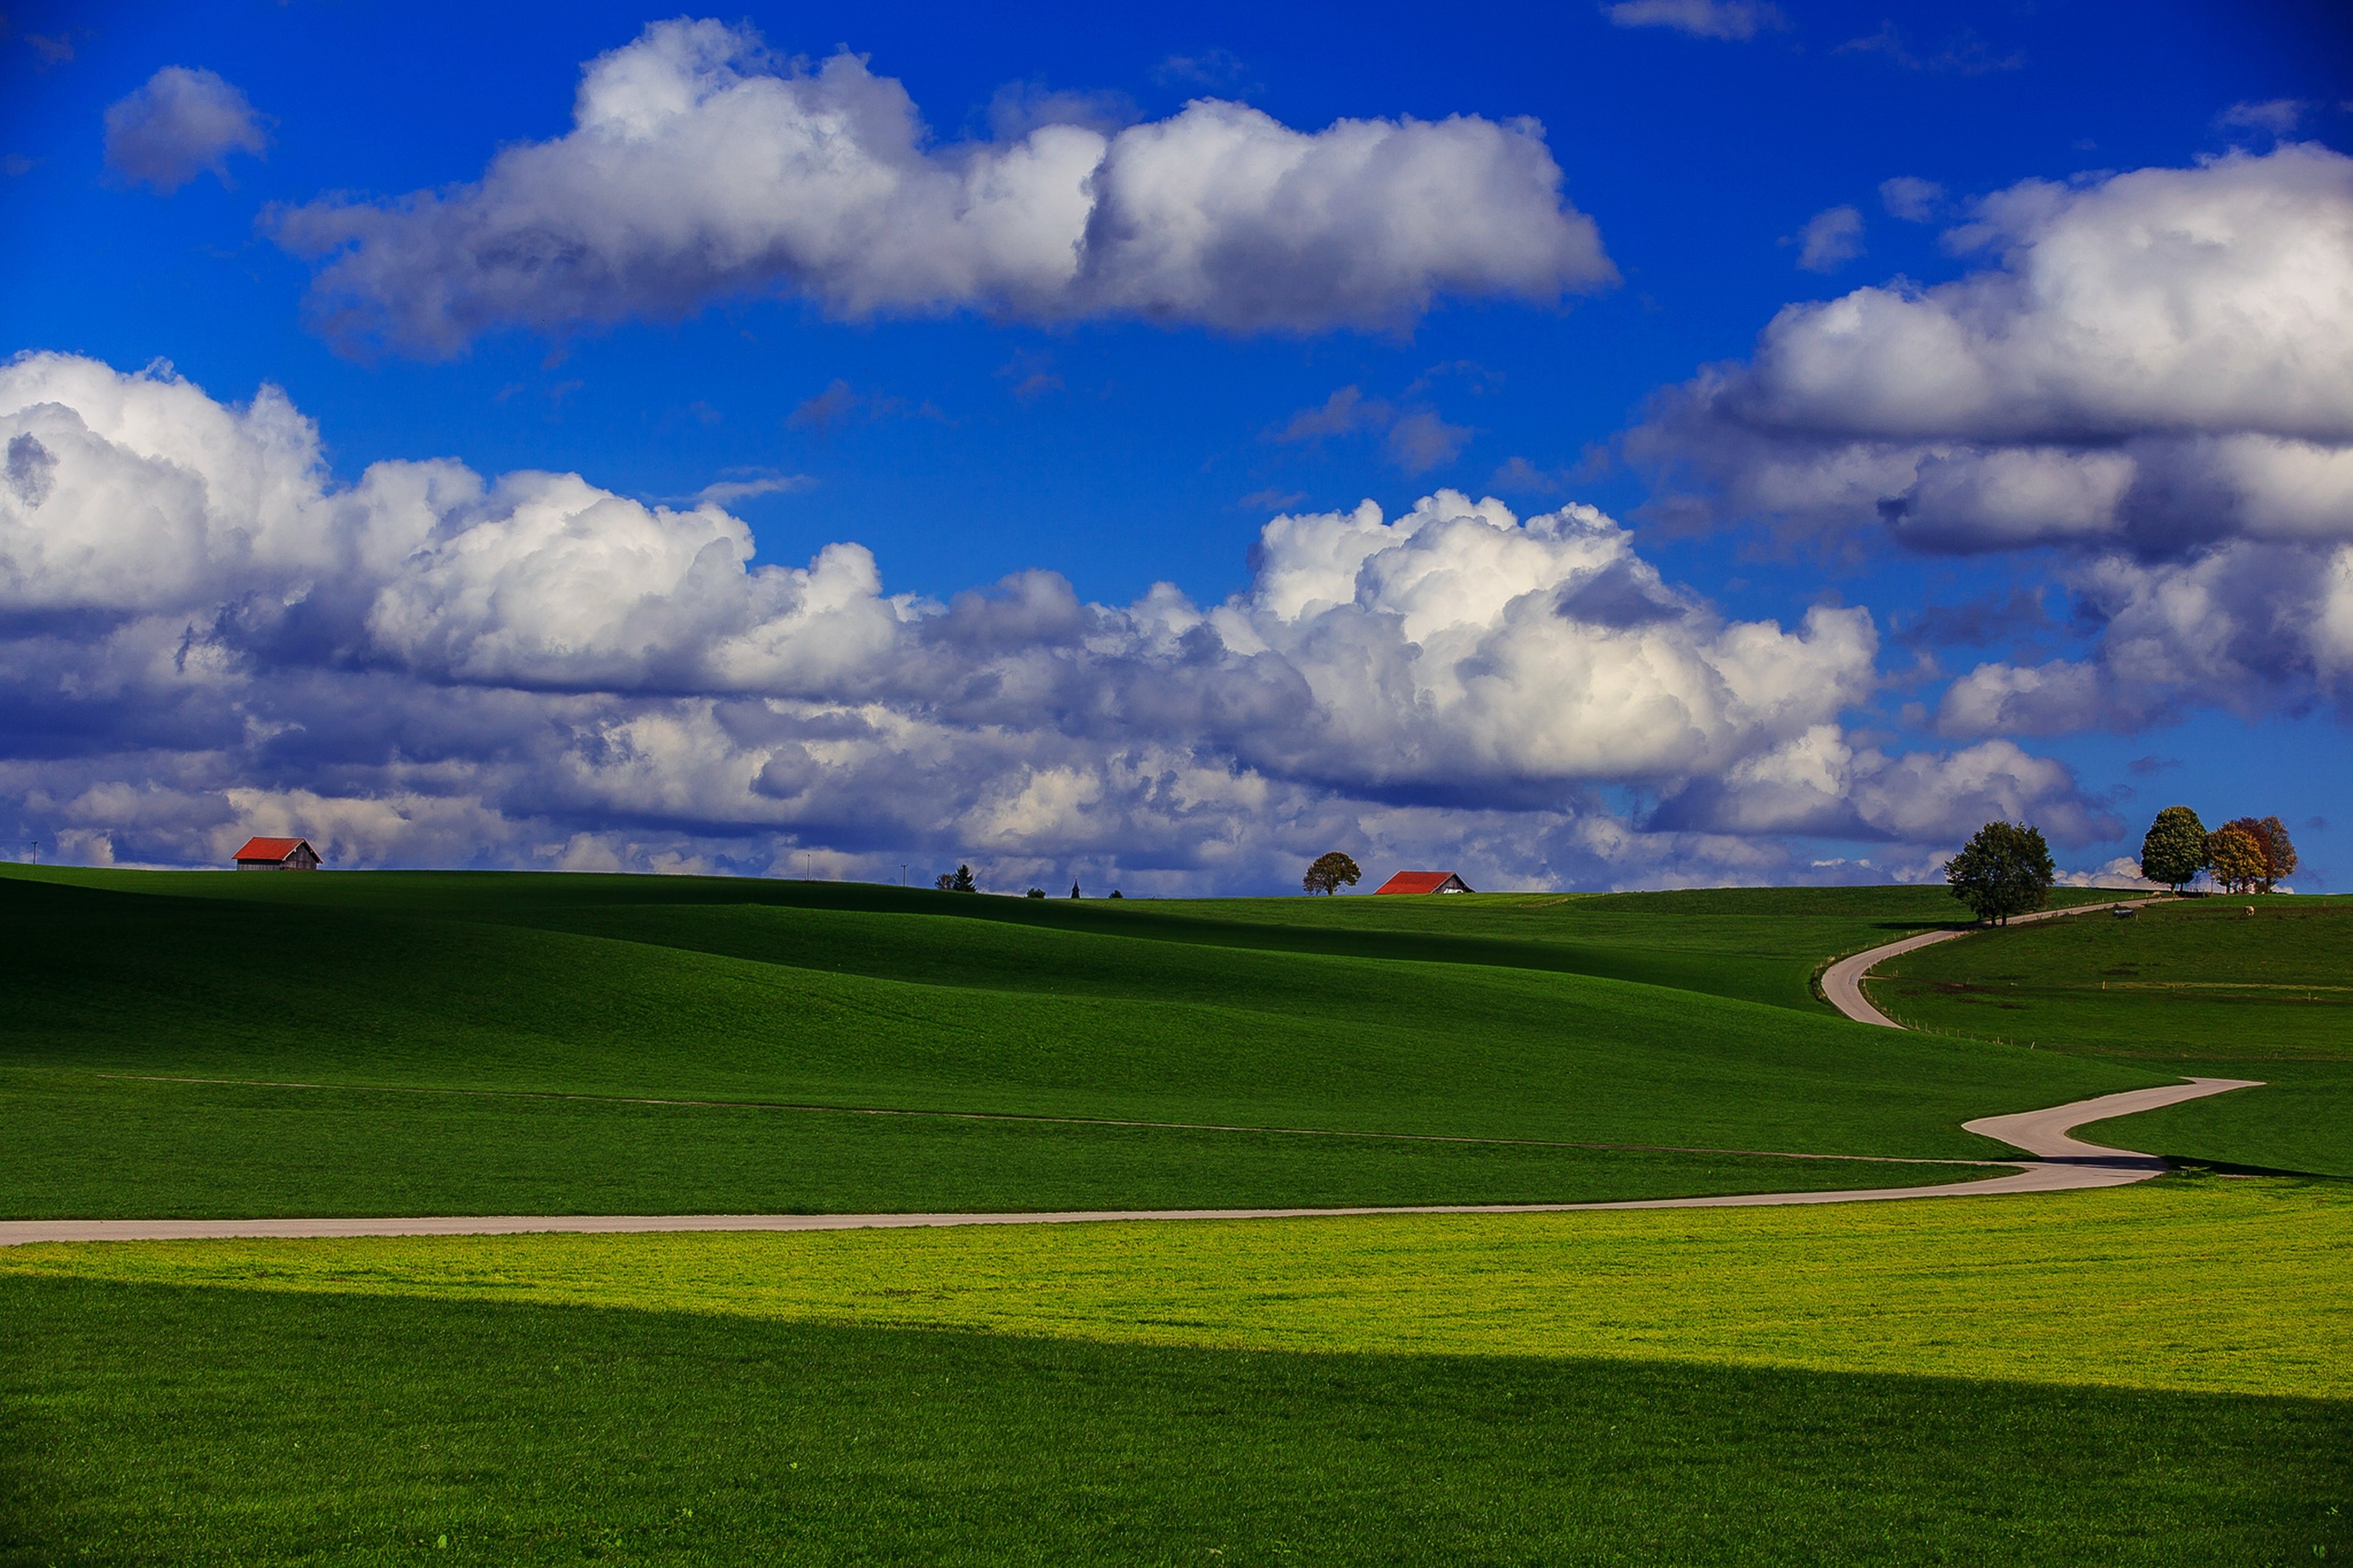 landscapes, Nature, Countryside, Fields, Houses, Trees, Road, Sky, Clouds, Blue, Grass Wallpaper